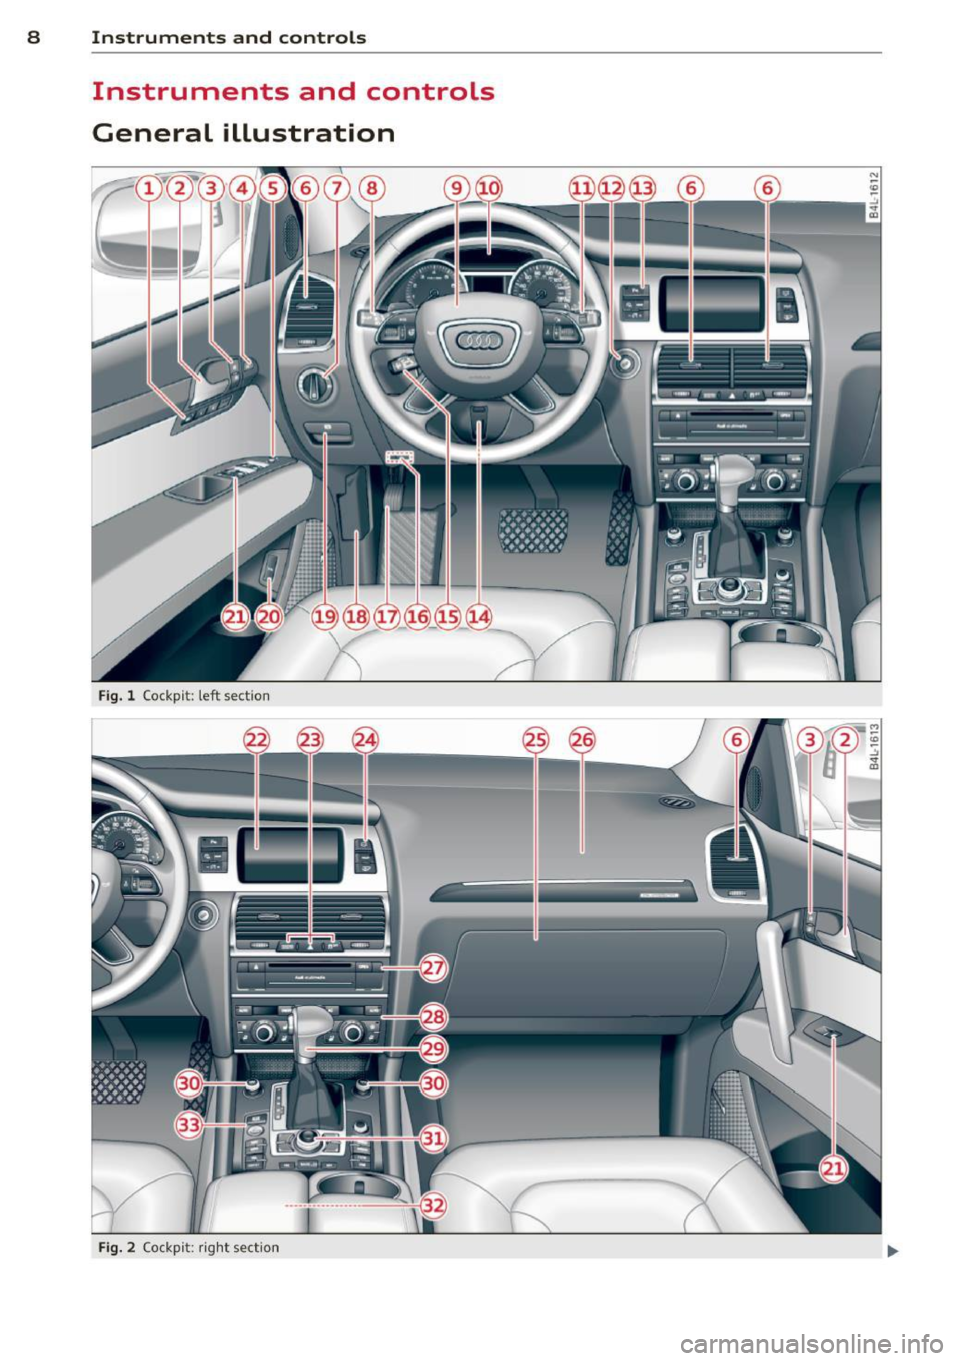 AUDI Q7 2015  Owner´s Manual 8  Instruments and controls 
Instruments  and  controls 
General  illustration 
Fig. l Cockp it:  left  sect io n 
-----
-----
----- ---
- - -- - -
~ --------
~ -,~ ---~ -·-c-•-
Fig. 2 Cock pi t: r